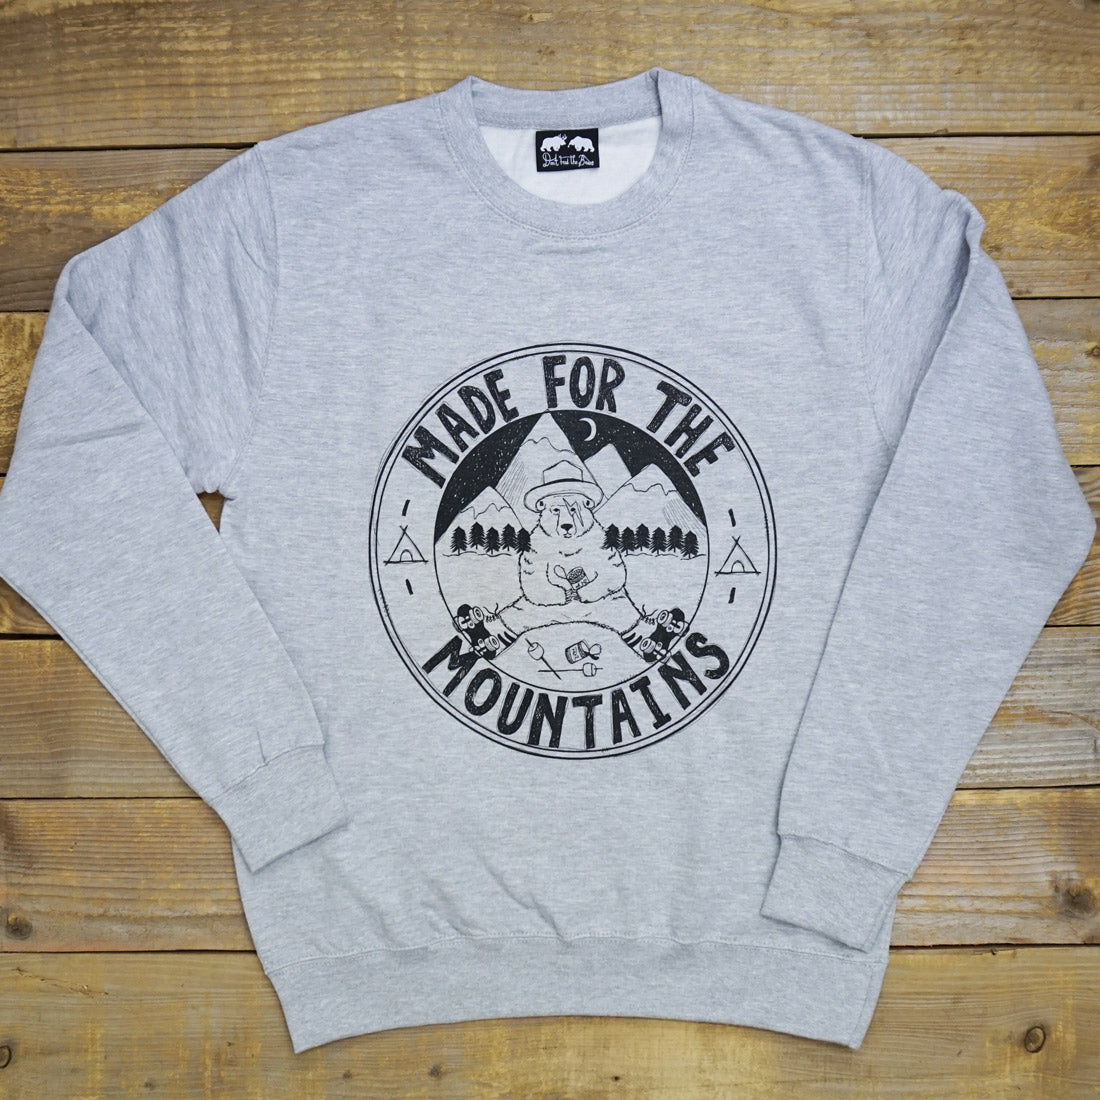 made for the mountains jumper